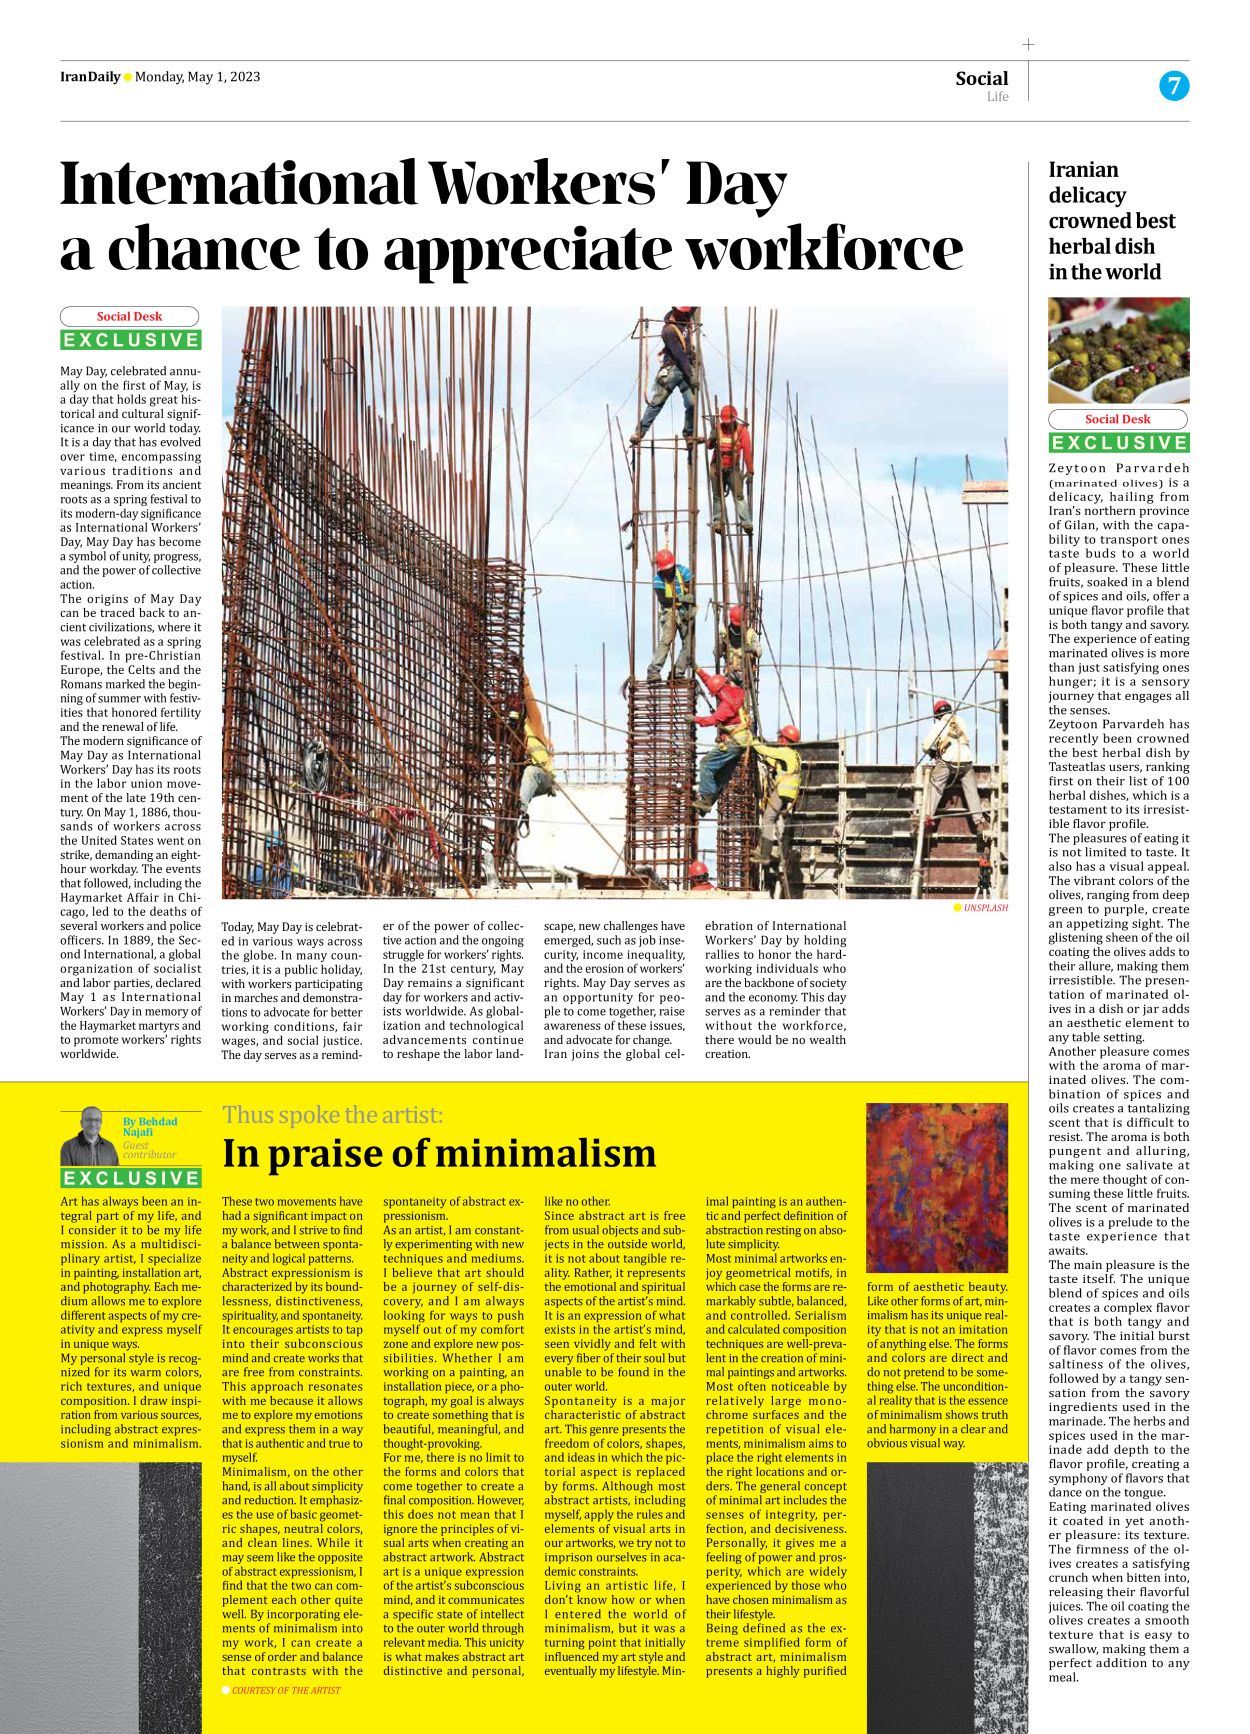 Iran Daily - Number Seven Thousand Two Hundred and Eighty - 01 May 2023 - Page 7